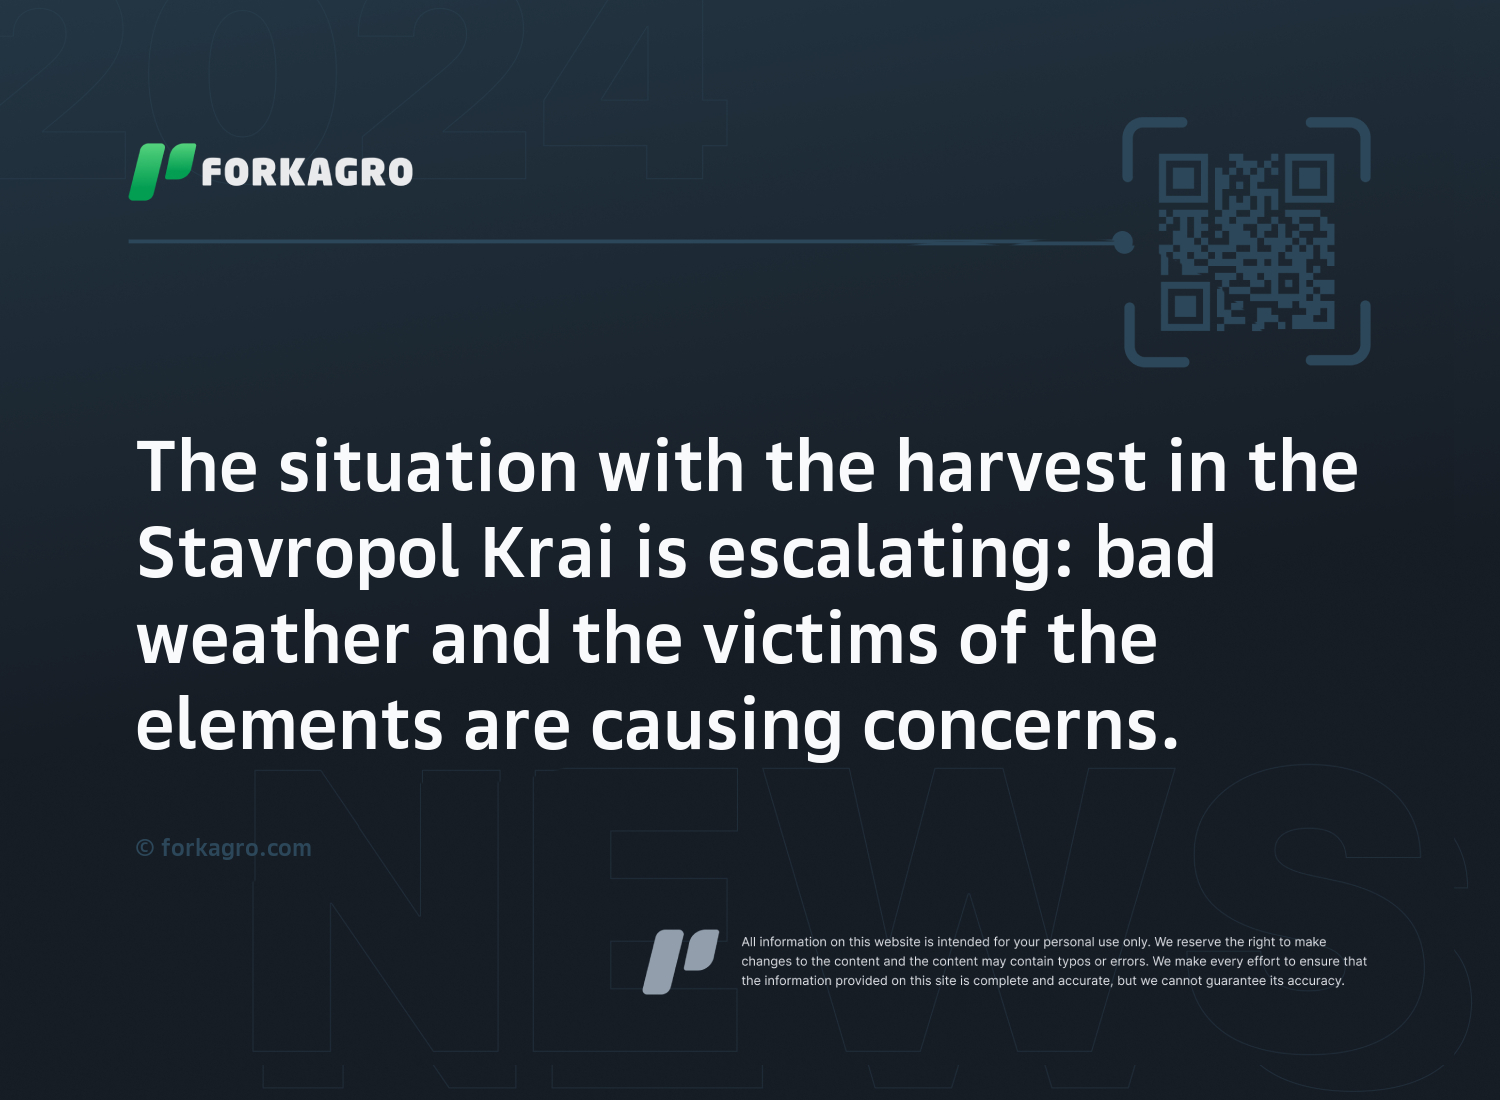 The situation with the harvest in the Stavropol Krai is escalating: bad weather and the victims of the elements are causing concerns.